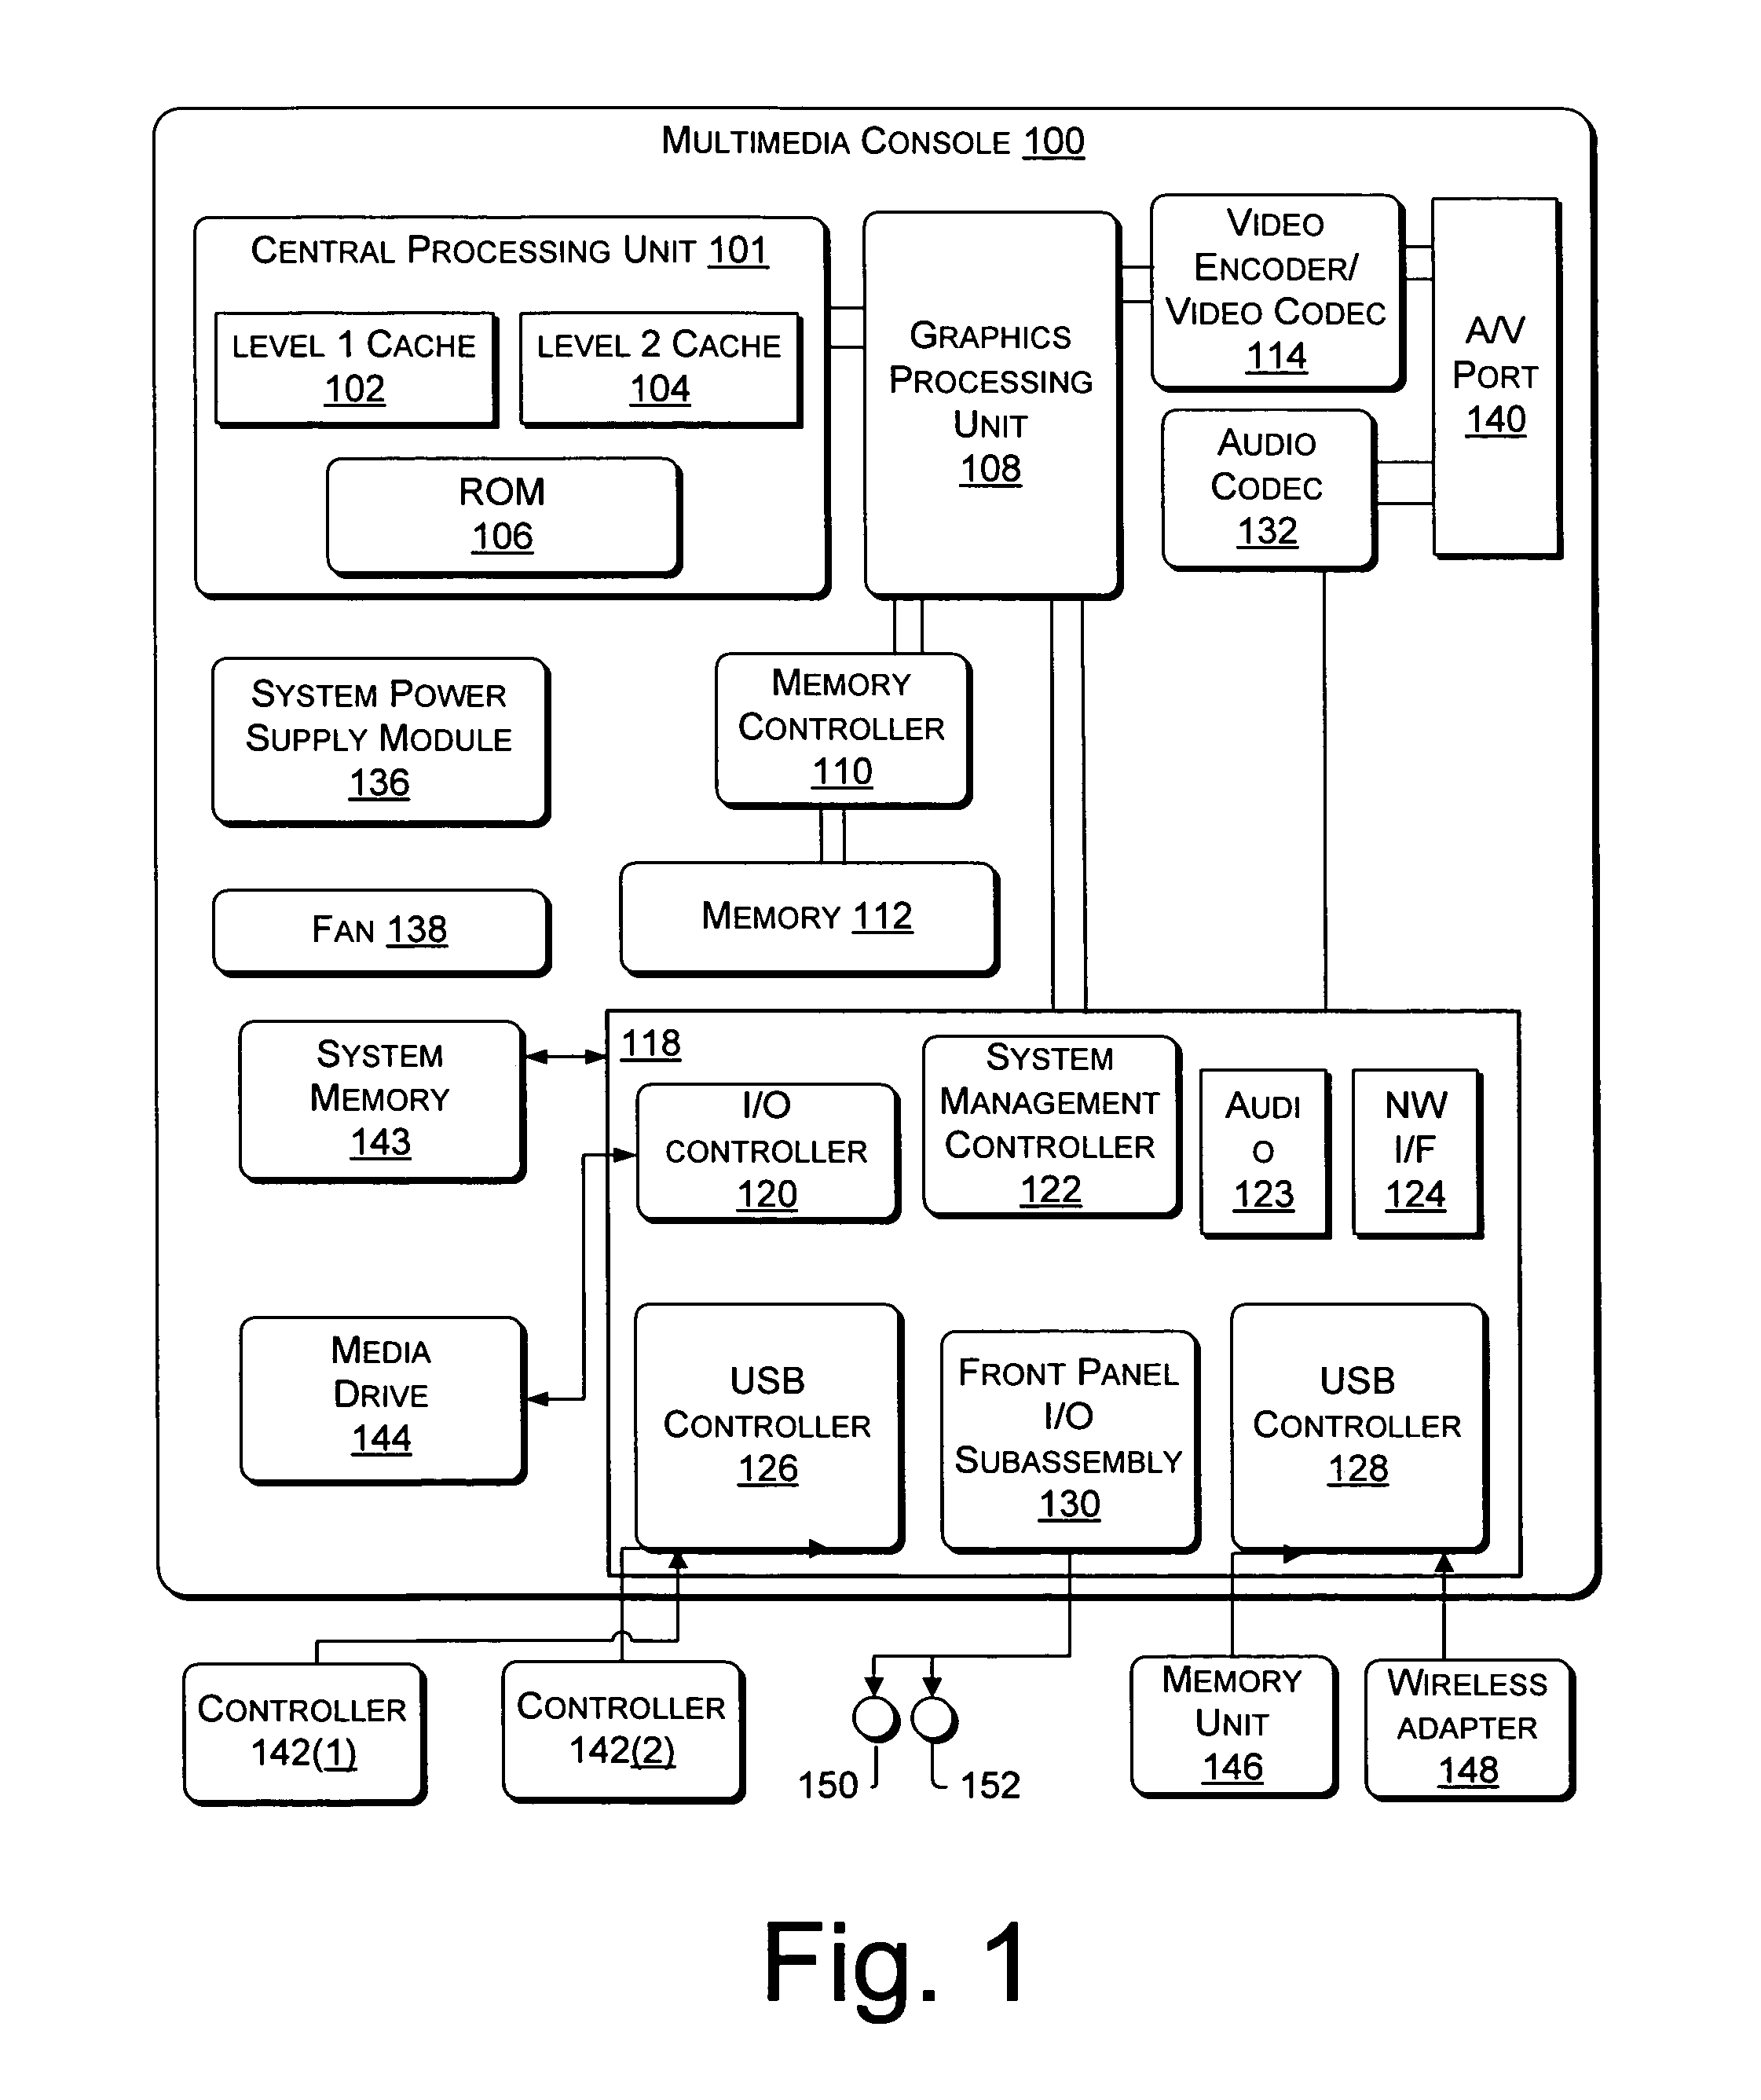 Licensing the use of software on a particular CPU